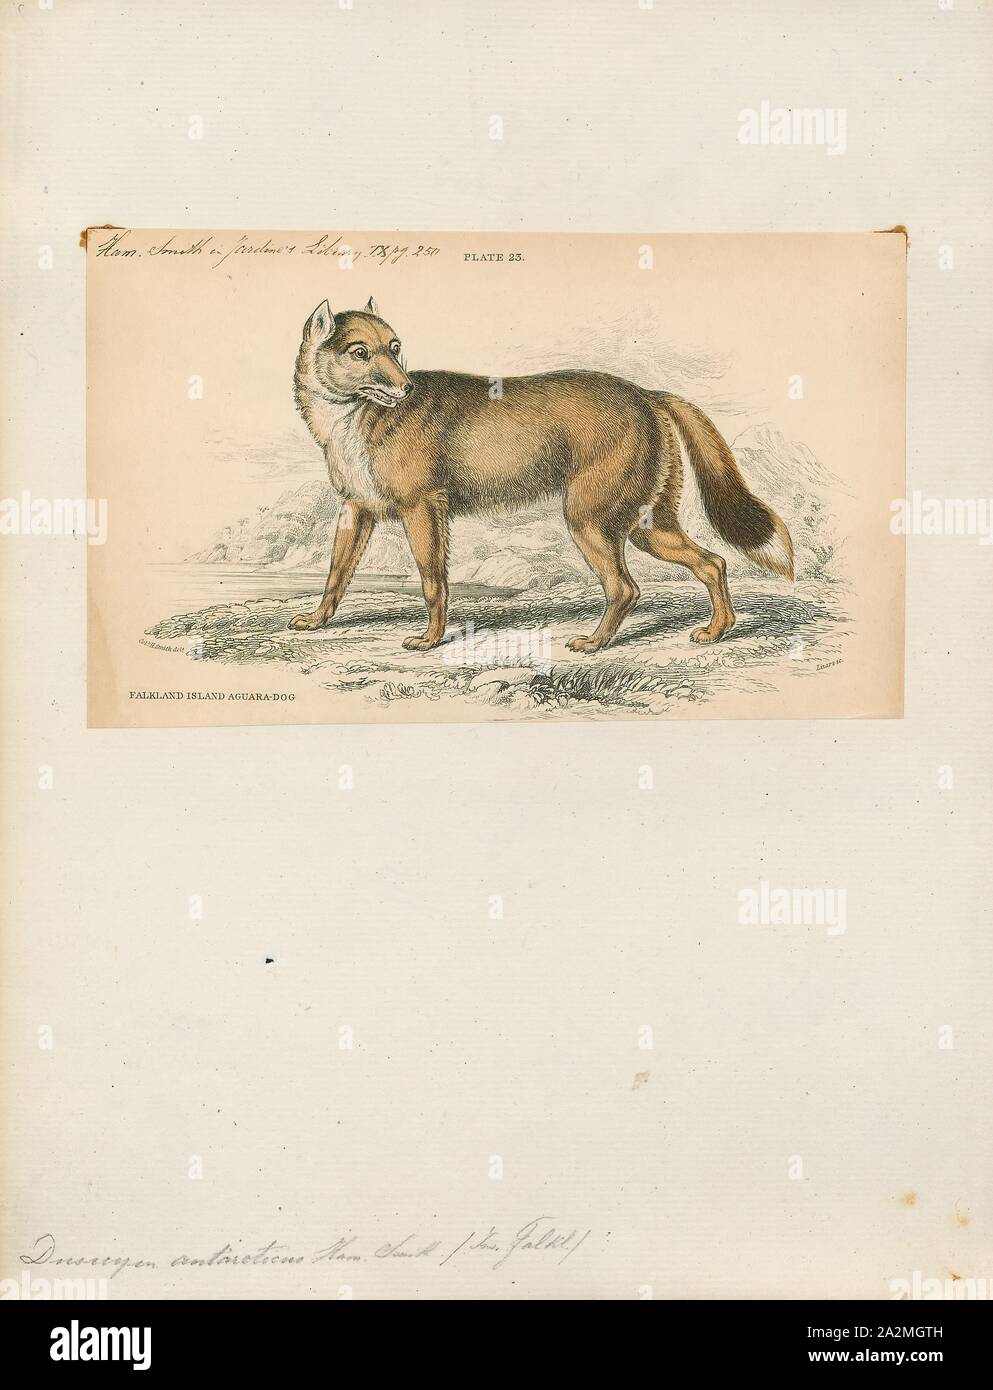 Dusicyon antarcticus, Print, Dusicyon is an extinct genus of South American canids. The type species is Dusicyon australis, the Falkland Islands wolf. In 1914, Oldfield Thomas established this genus, in which he included the culpeo and other South American foxes. These other canids were removed to Lycalopex by Langguth in 1975. Dusicyon avus, widely distributed in the late Pleistocene from Uruguay through Buenos Aires Province to southernmost Chile, is the closest known relative of the Falkland Islands wolf; the two lineages split only about 16, 000 years ago. It died out in the late Holocene Stock Photo